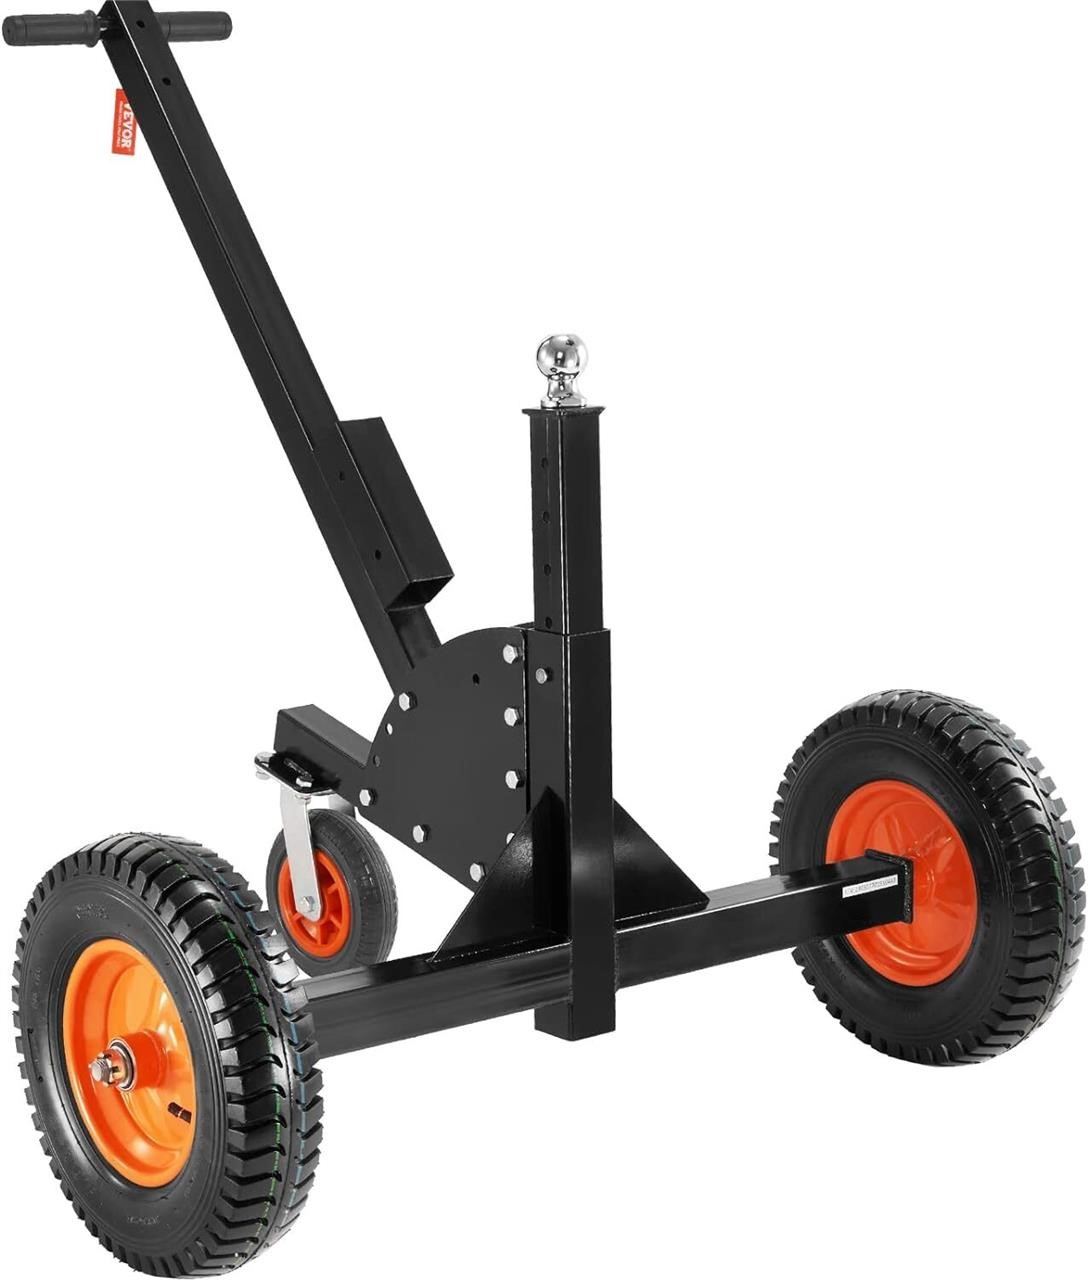 Trailer Dolly  1500lbs  23.6'-35.4'